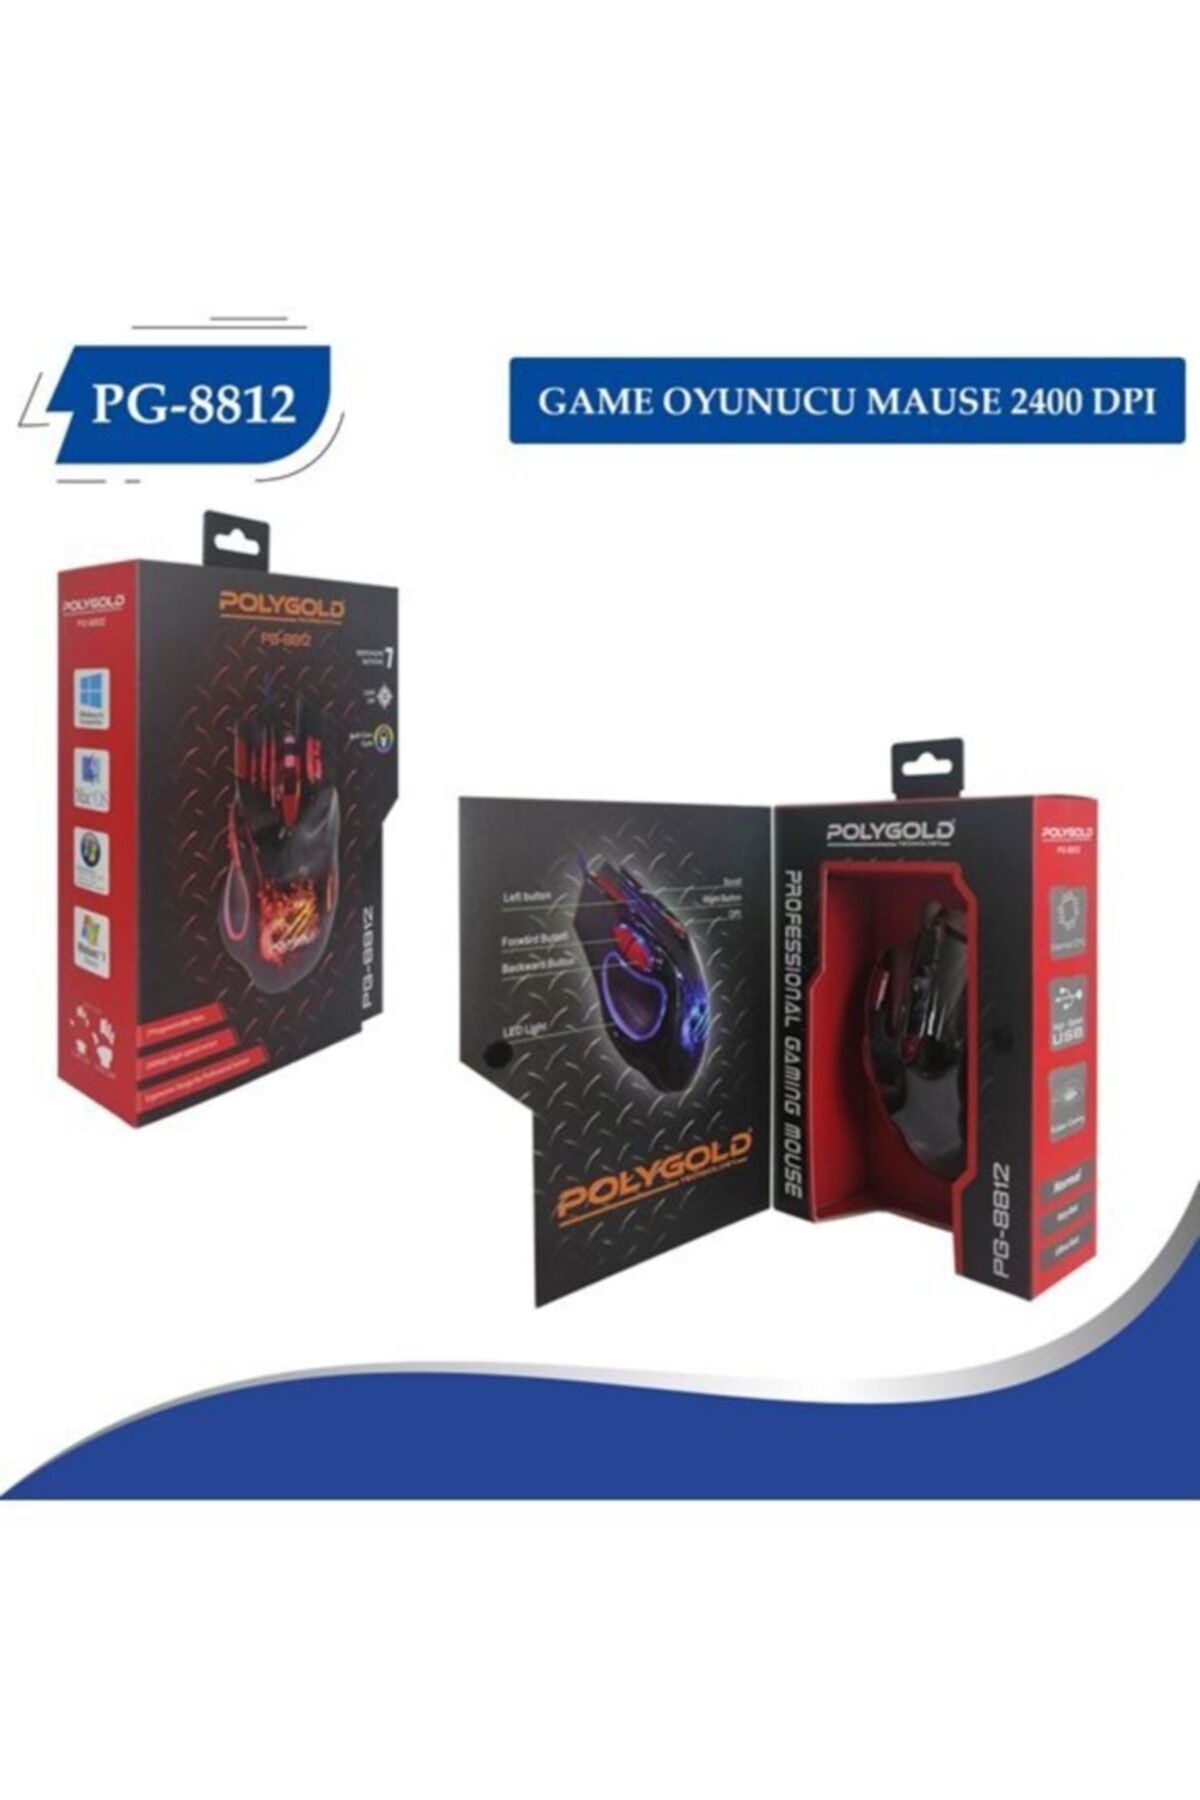 Polygold Pg-8812 Gaming Mouse